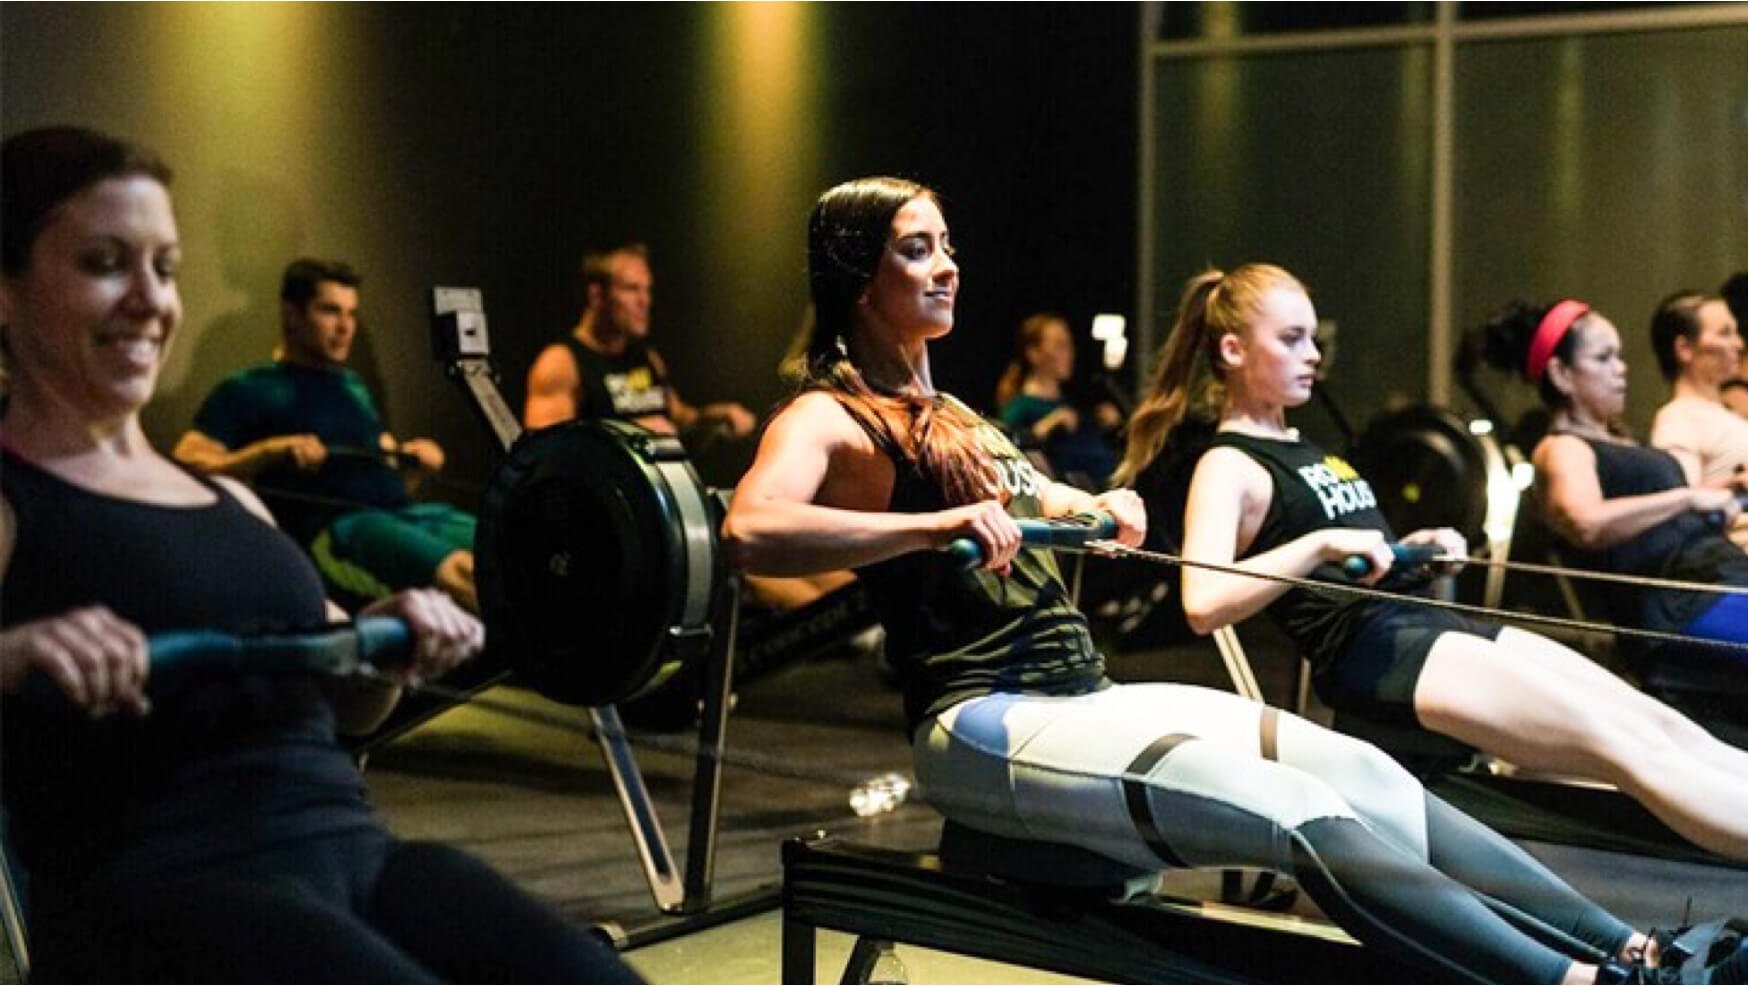 Bergen County's First Rowing Studio Opening In Wash. Twp.